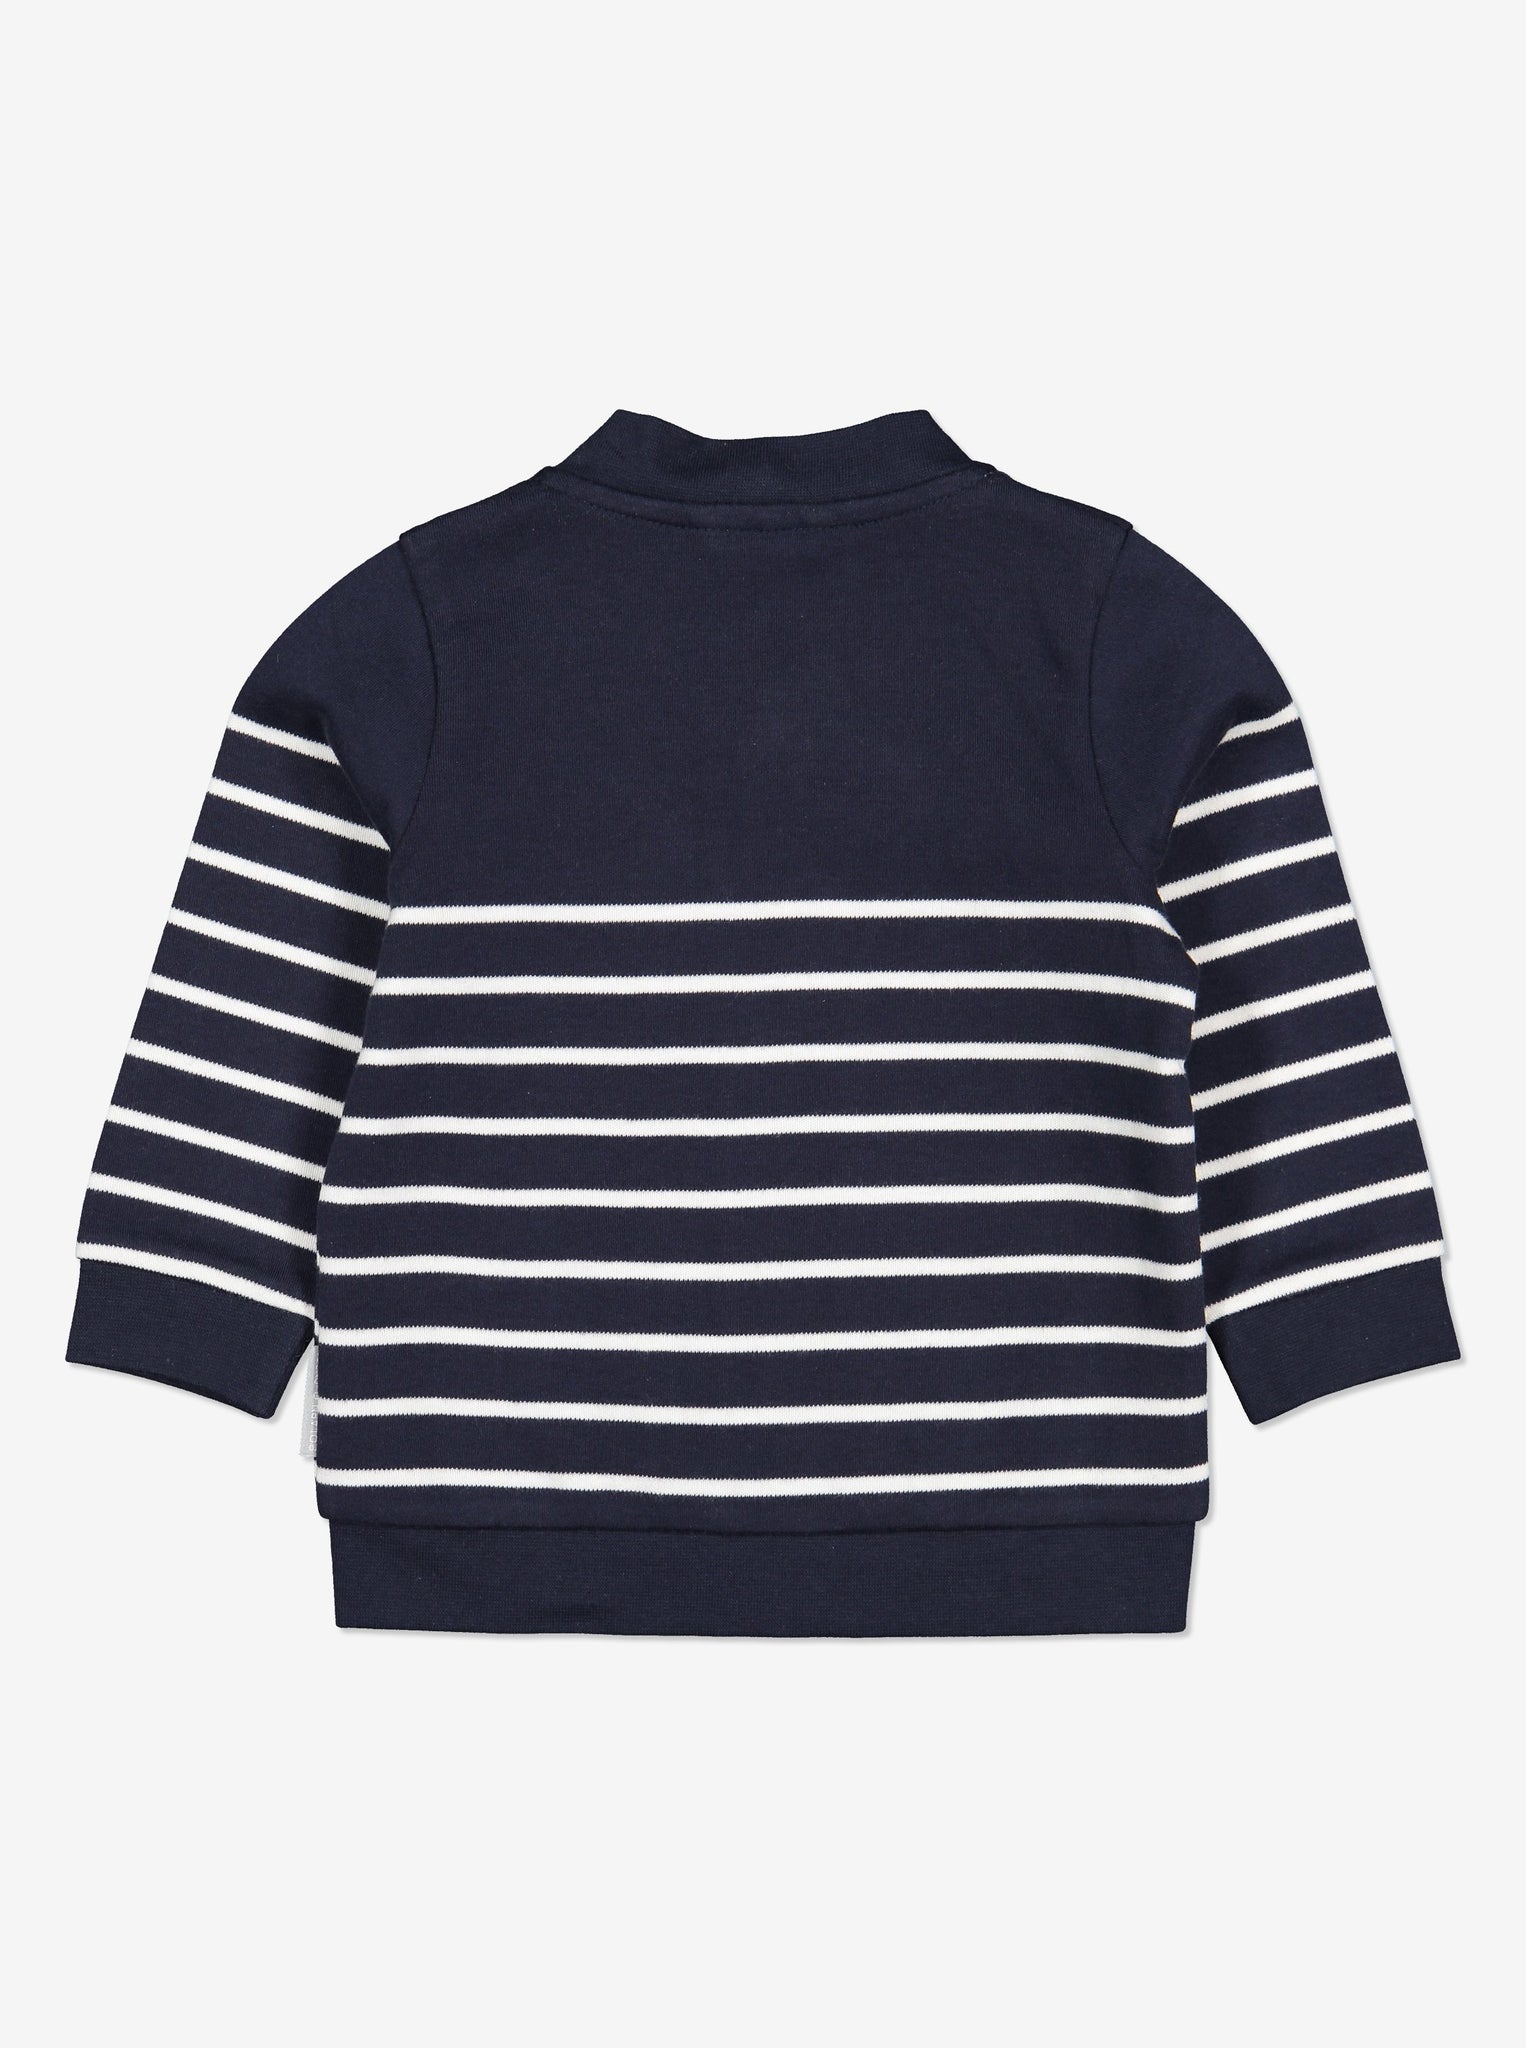 Back view of navy and white stripe baby sweatshirt. Made in 100% organic cotton.